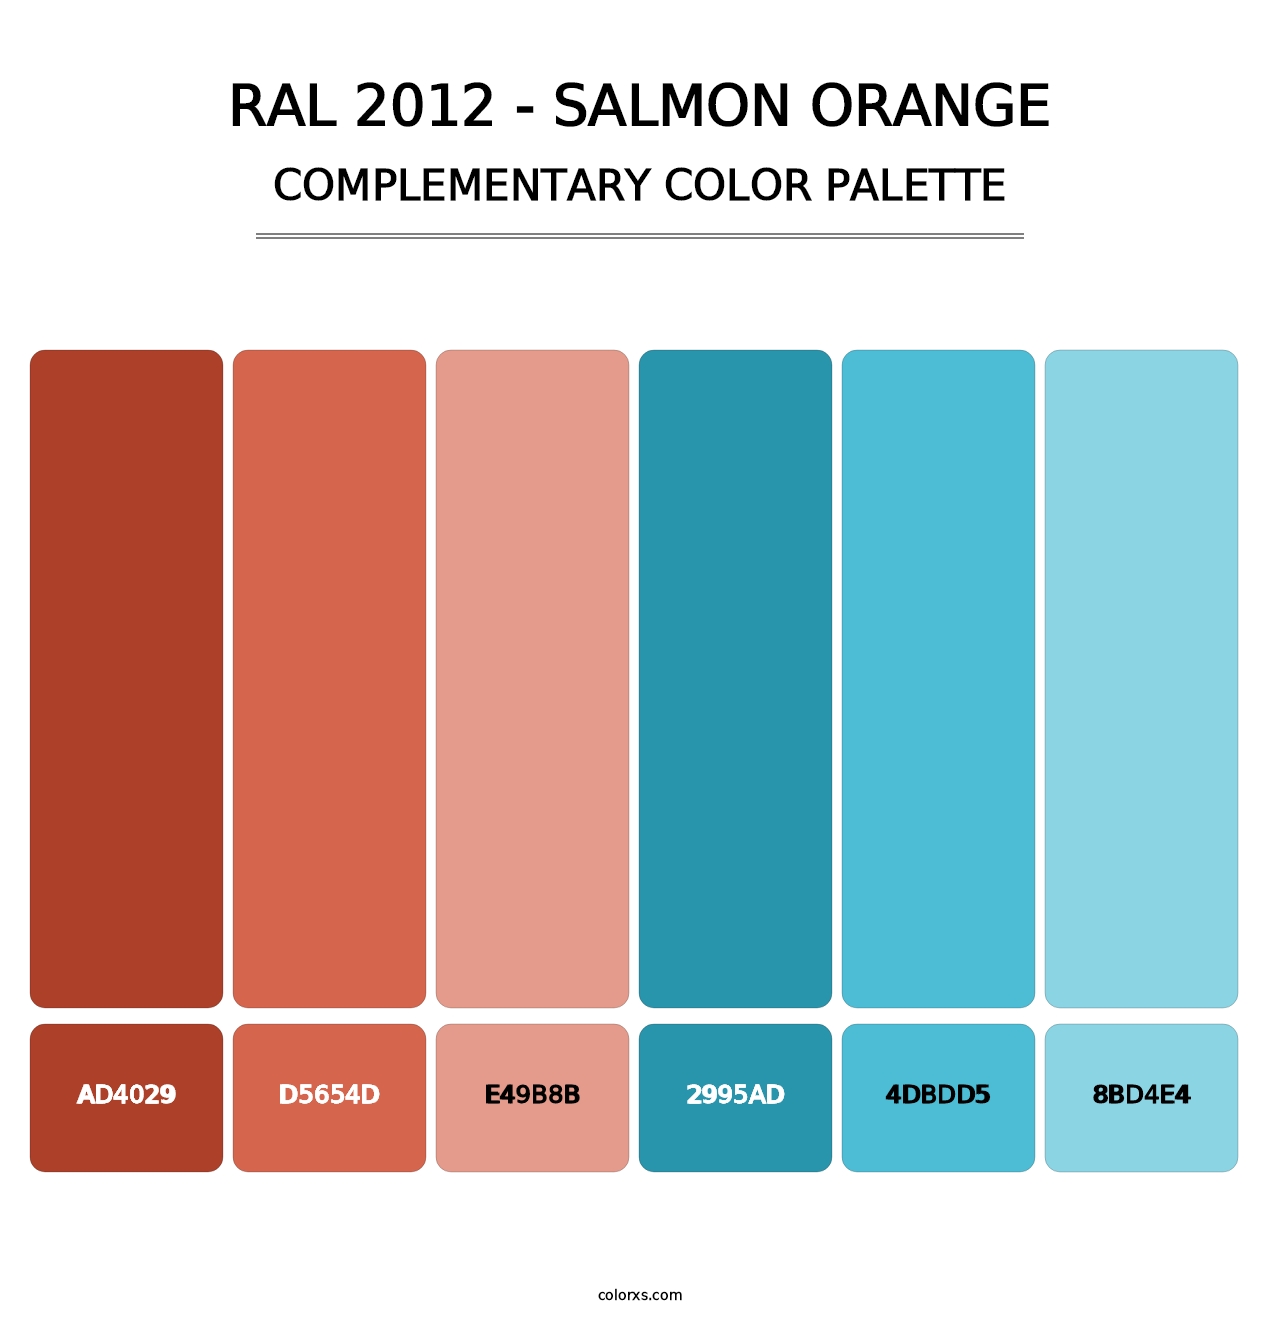 RAL 2012 - Salmon Orange - Complementary Color Palette